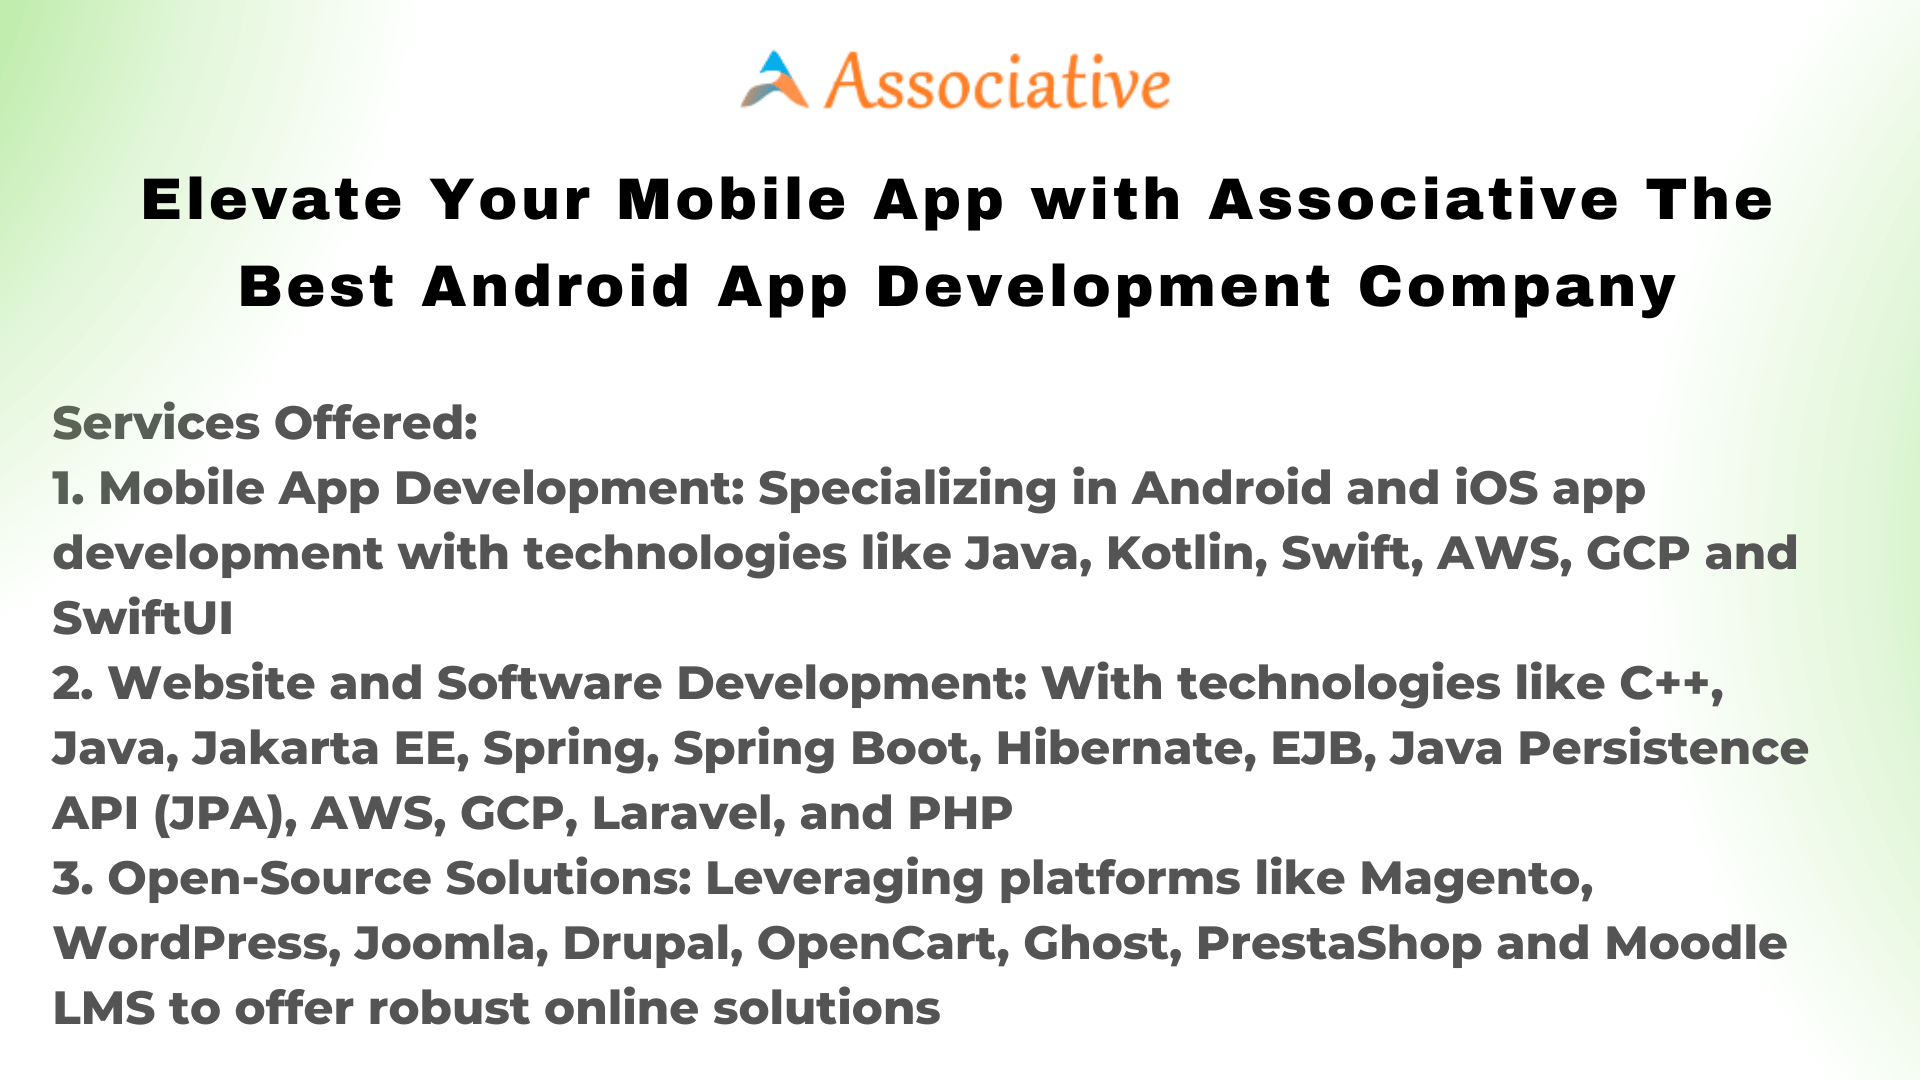 Elevate Your Mobile App with Associative The Best Android App Development Company